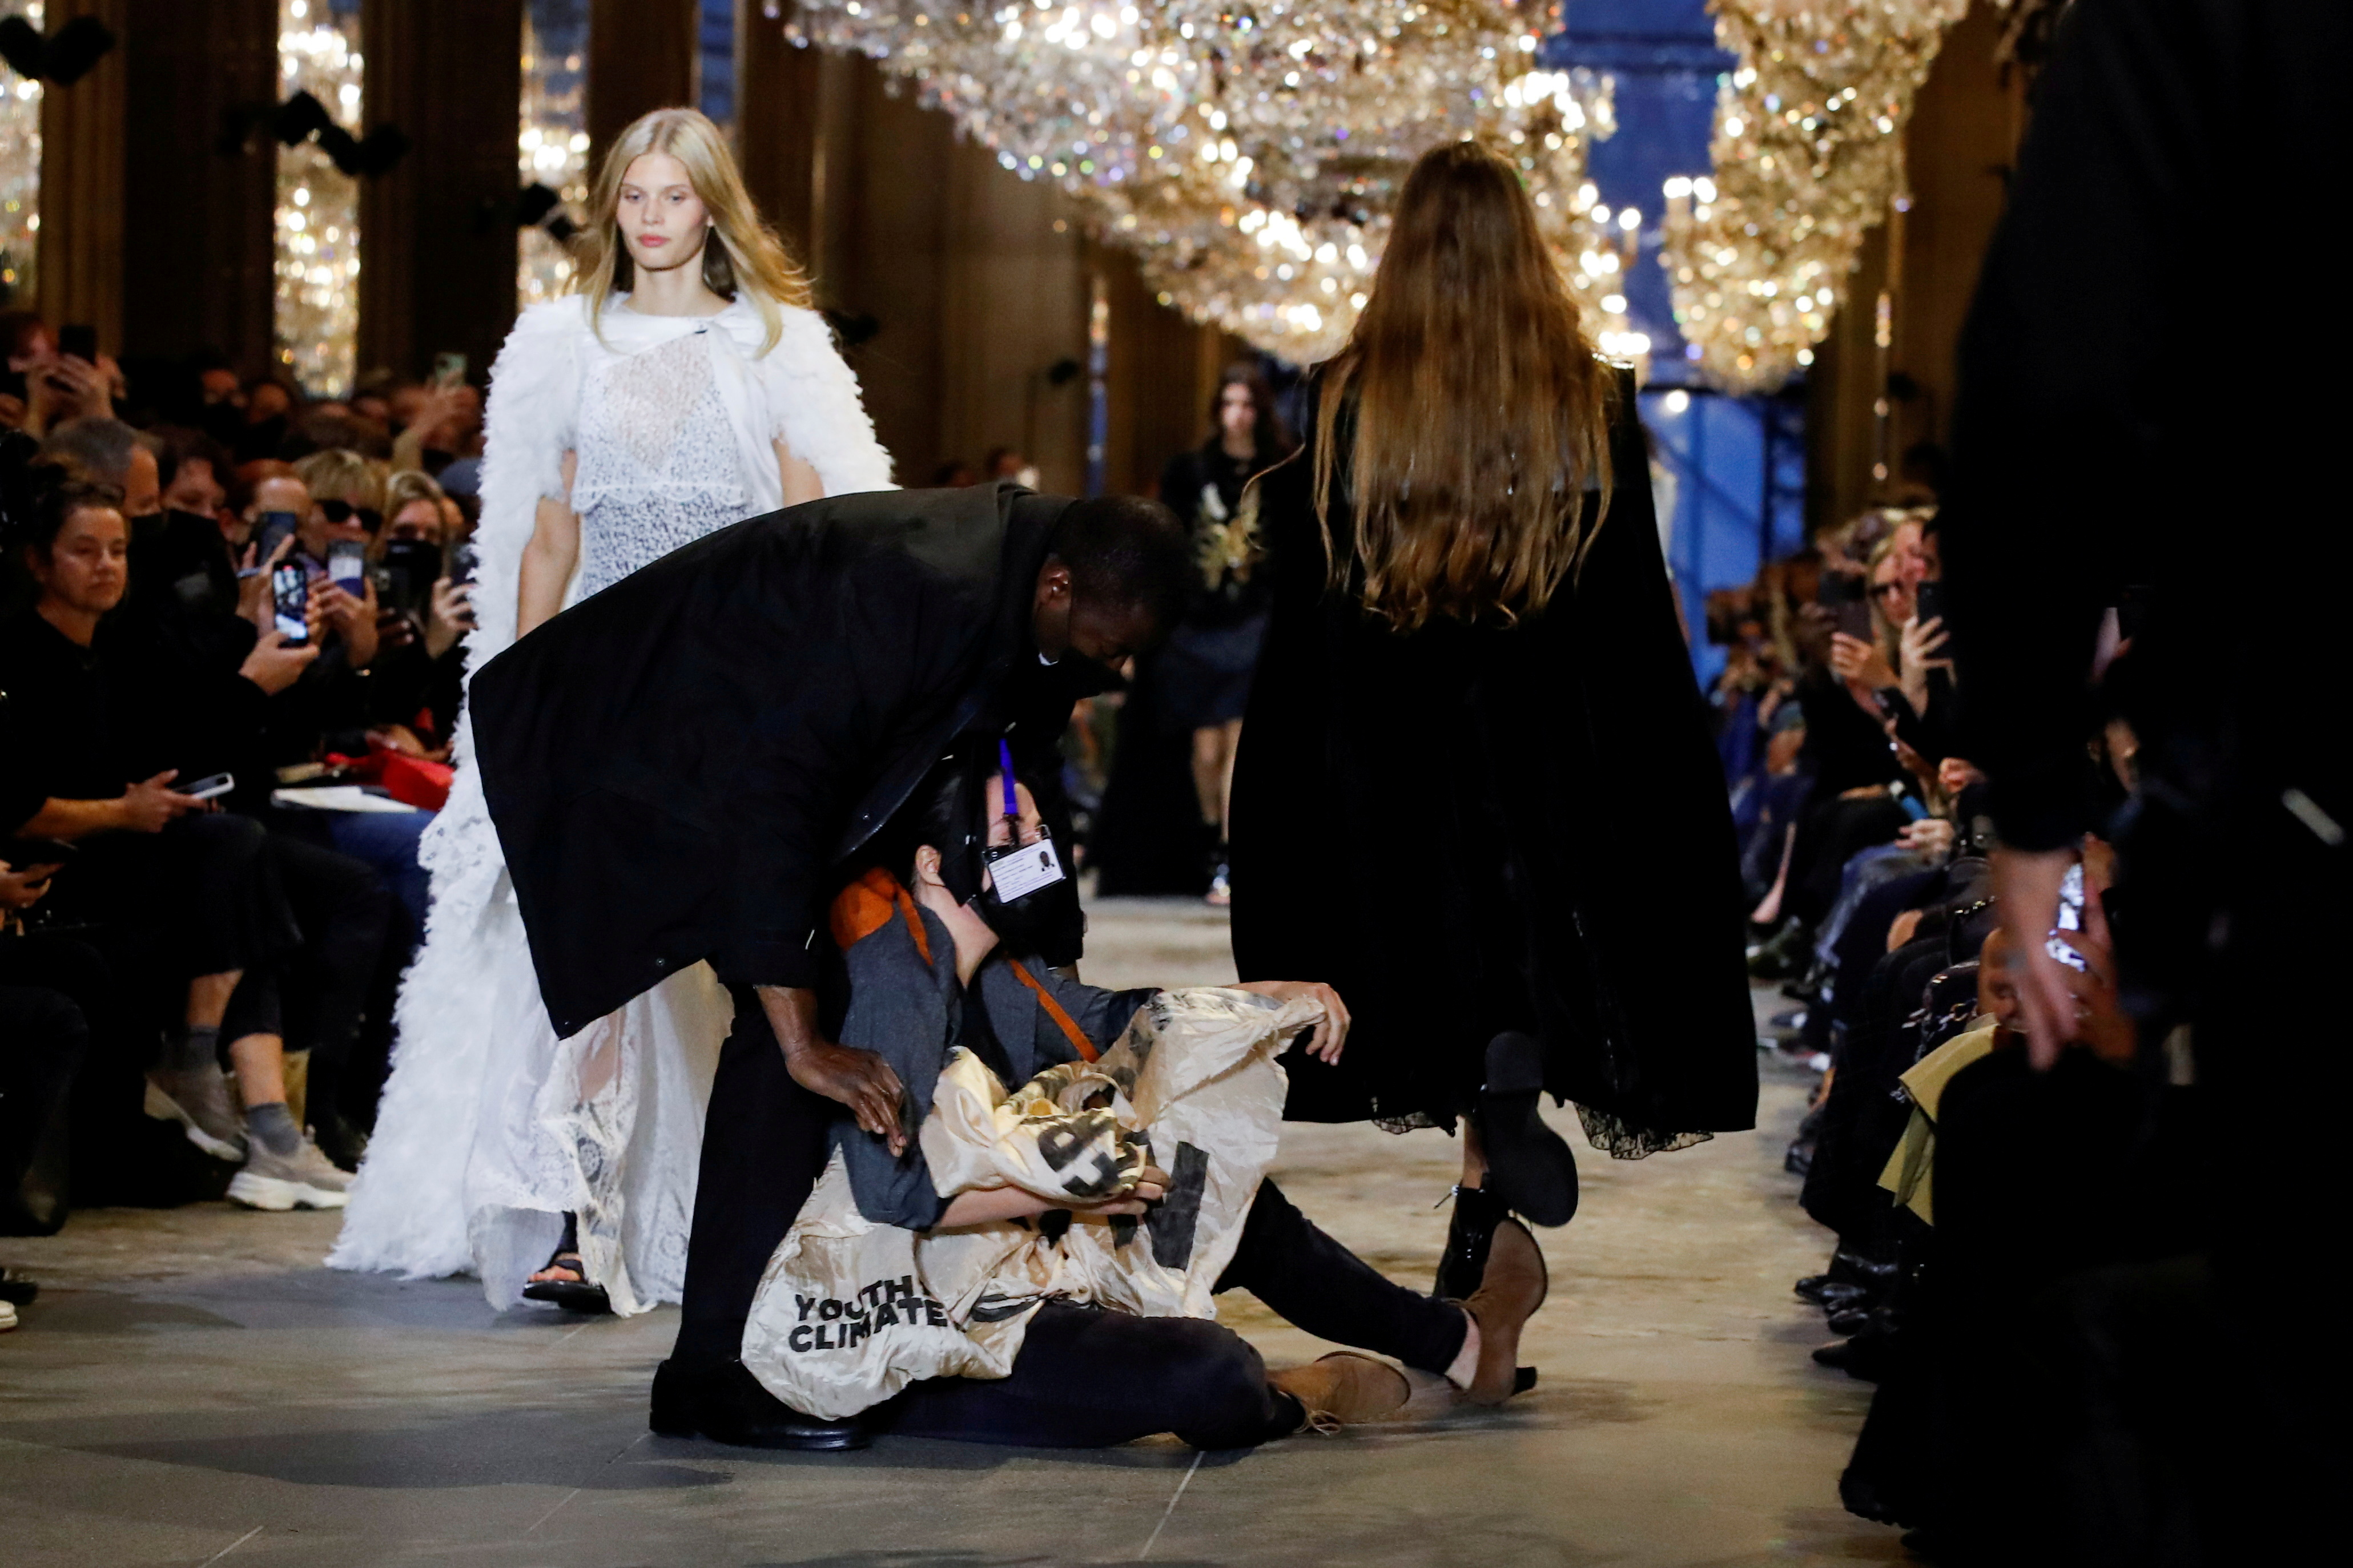 A member of the security personnel removes an activist belonging to the 'Les Amis de la Terre France' or 'Friends of the Earth - France' , who crashed the designer Nicolas Ghesquiere Spring/Summer 2022 women's ready-to-wear collection show for fashion house Louis Vuitton during Paris Fashion Week in Paris, France, October 5, 2021. REUTERS/Gonzalo Fuentes